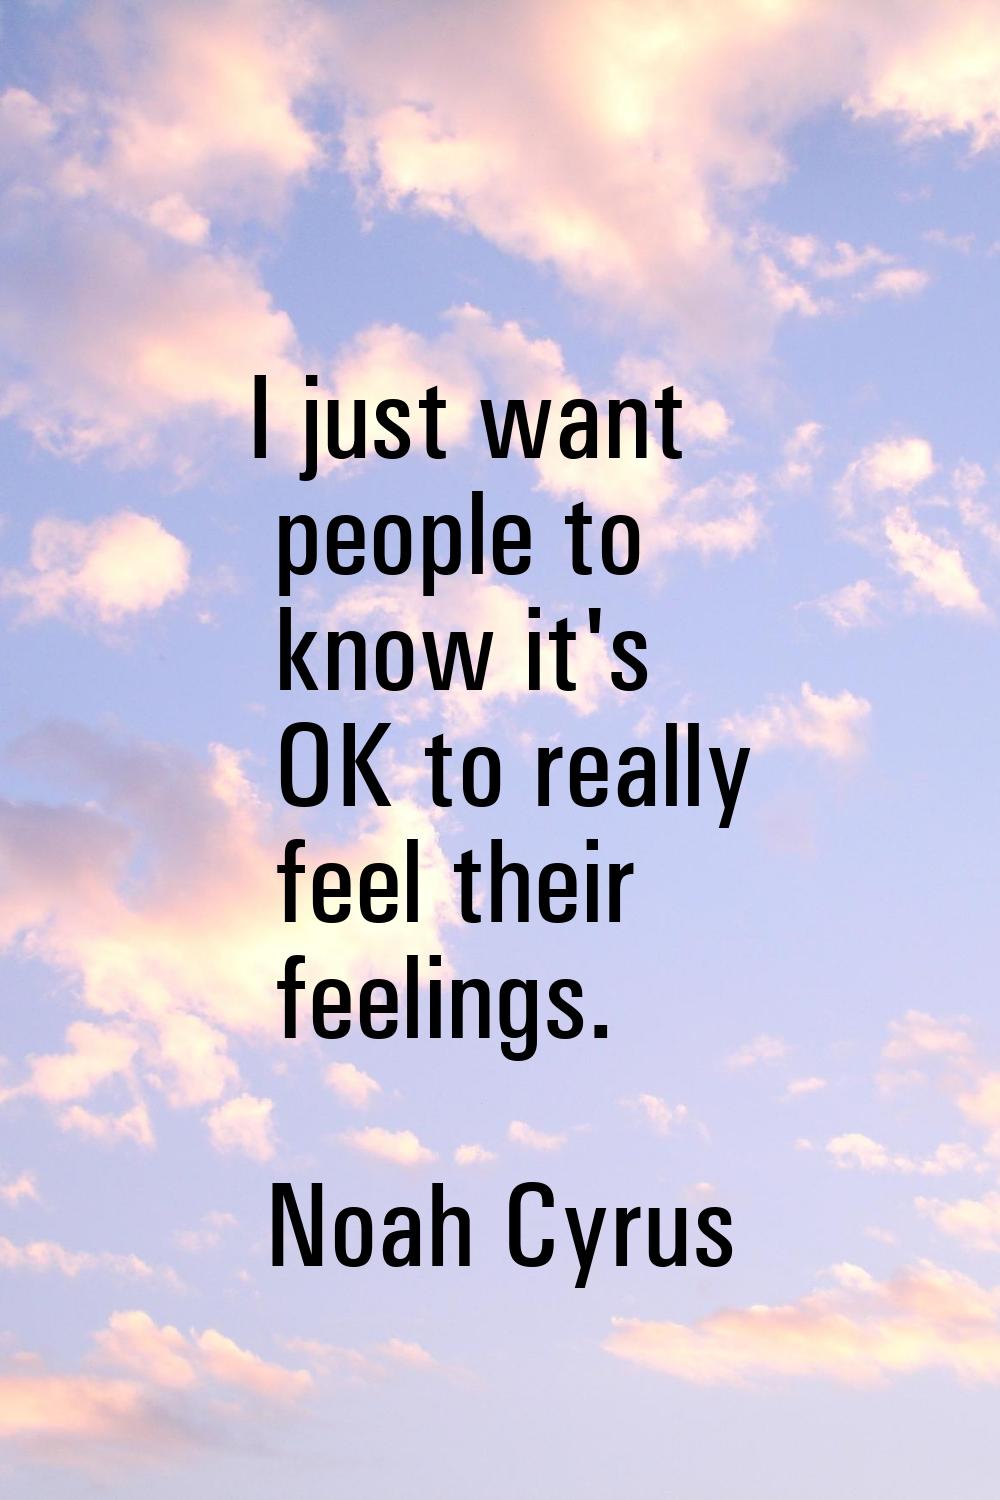 I just want people to know it's OK to really feel their feelings.